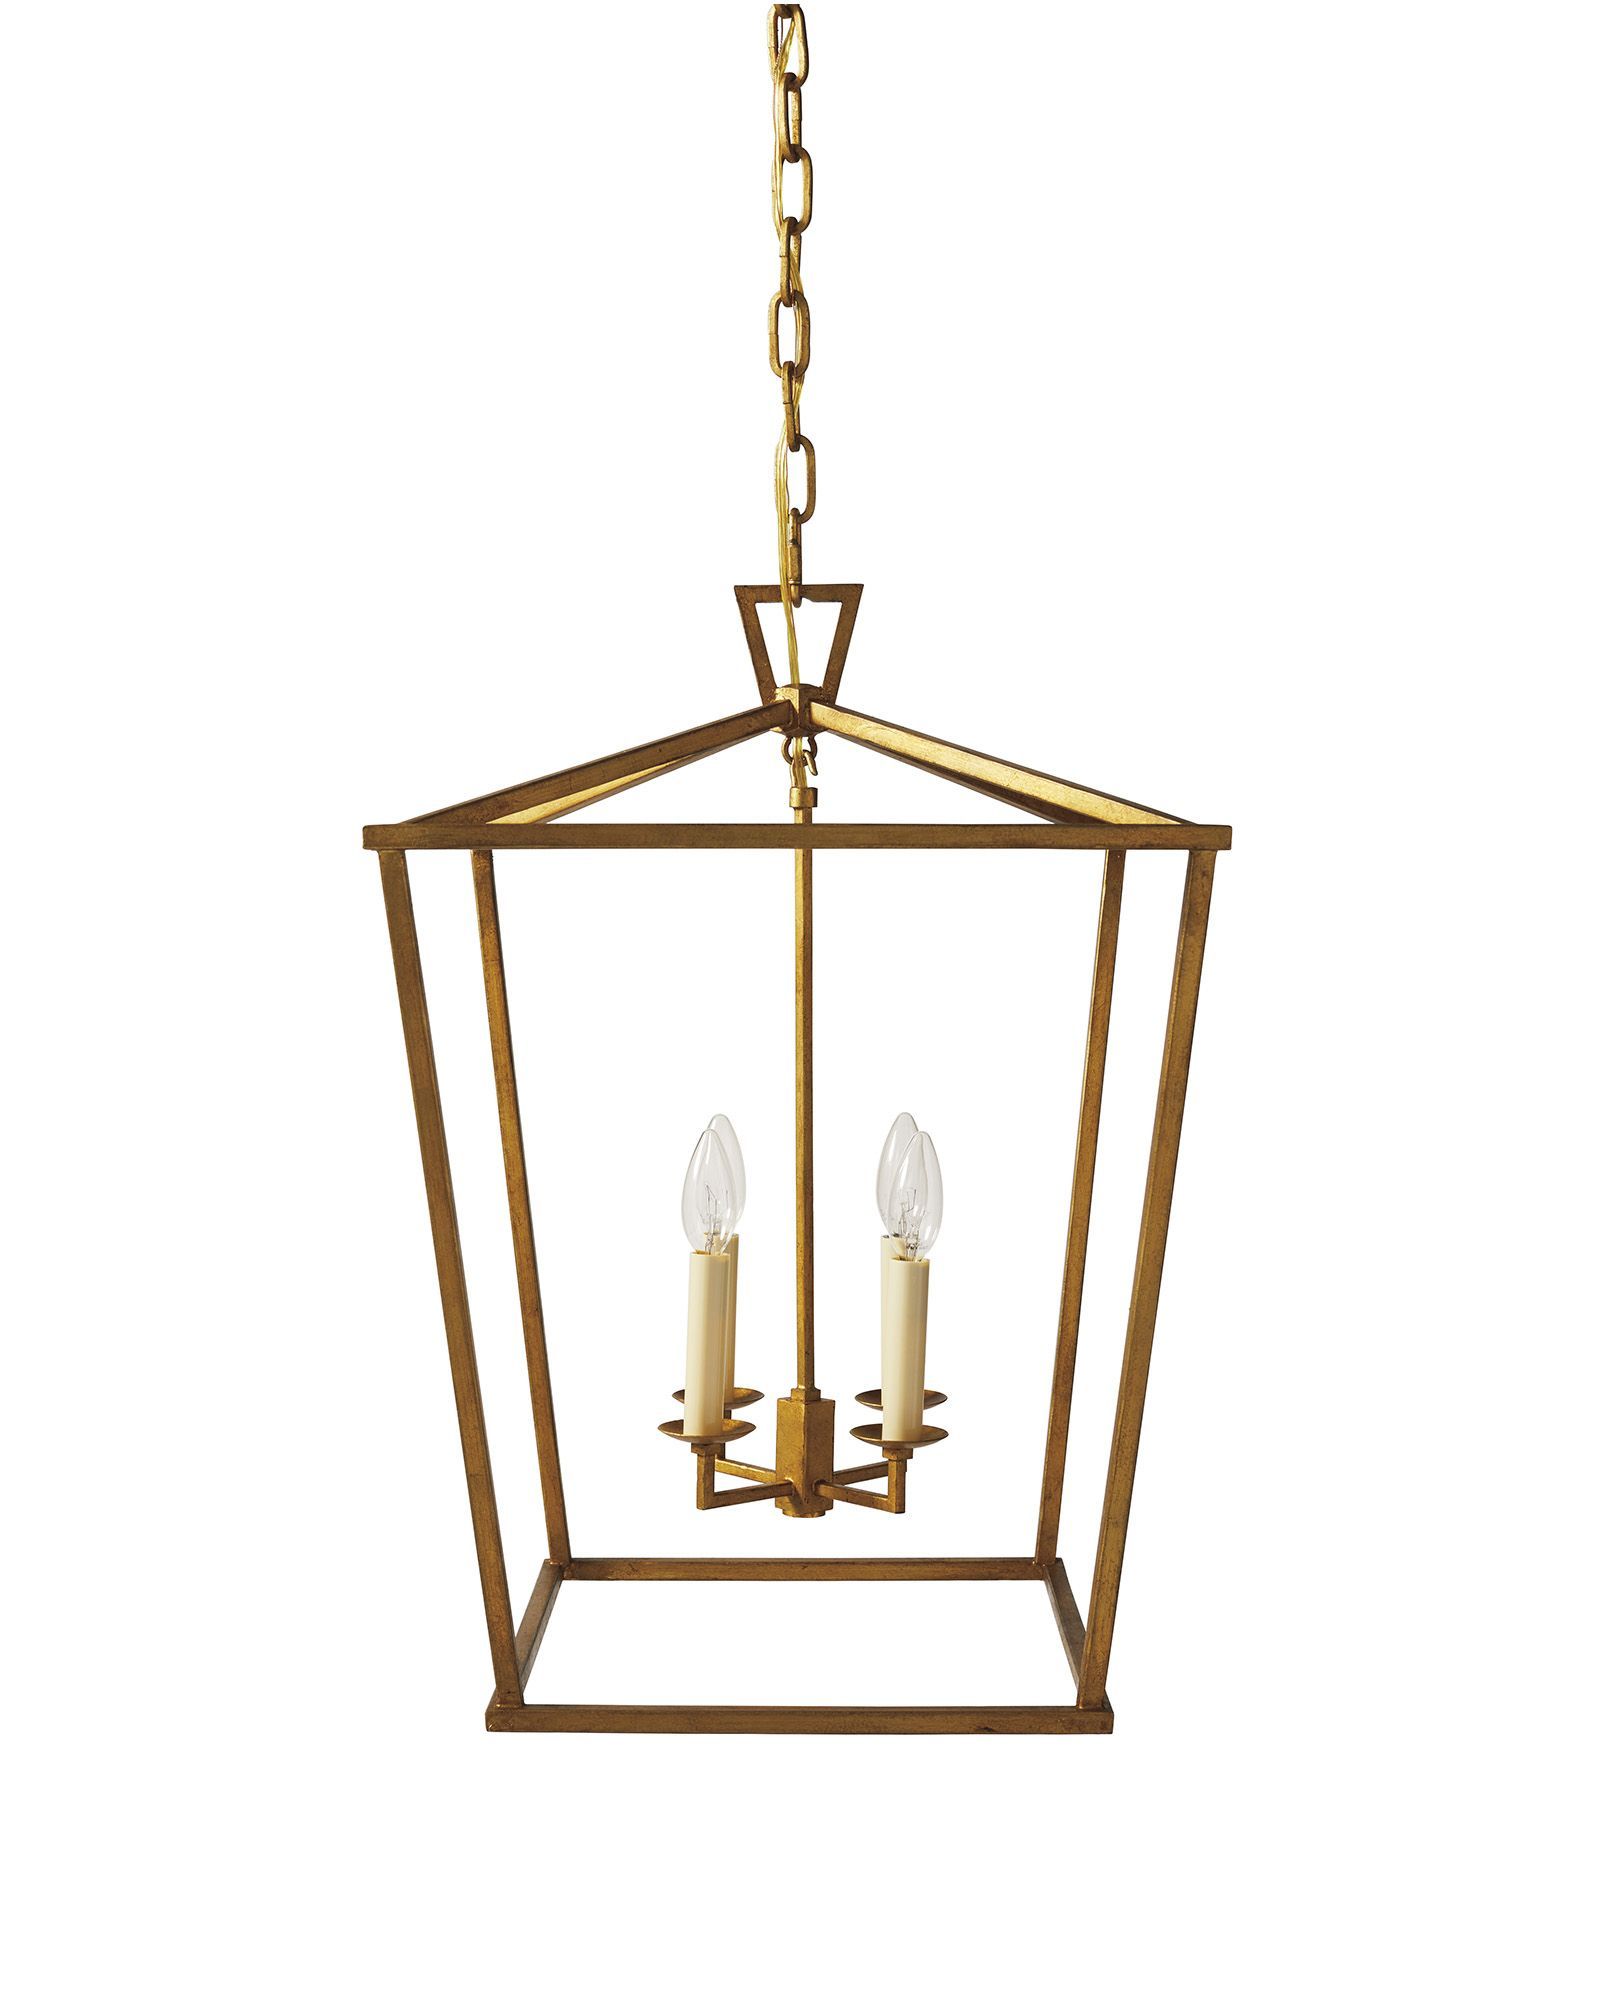 Serena & Lily Kentfield Pendant | Florida | Lighting Throughout Tiana 4 Light Geometric Chandeliers (View 16 of 30)